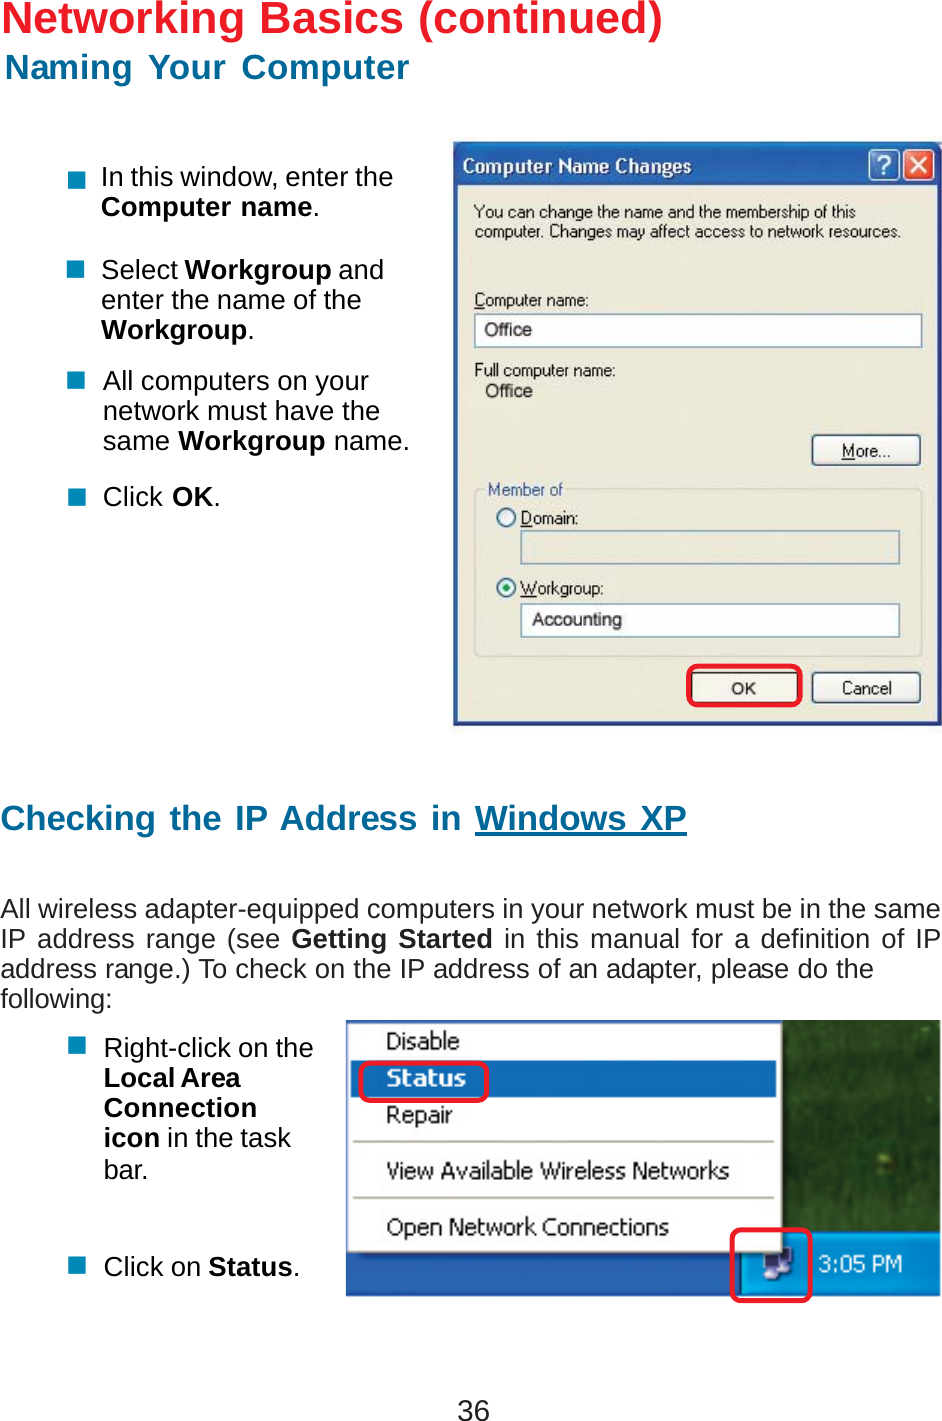 36In this window, enter theComputer name.Select Workgroup andenter the name of theWorkgroup.All computers on yournetwork must have thesame Workgroup name.Click OK.Checking the IP Address in Windows XPAll wireless adapter-equipped computers in your network must be in the sameIP address range (see Getting Started in this manual for a definition of IPaddress range.) To check on the IP address of an adapter, please do thefollowing:Right-click on theLocal AreaConnectionicon in the taskbar.Click on Status.Networking Basics (continued)Naming Your Computer